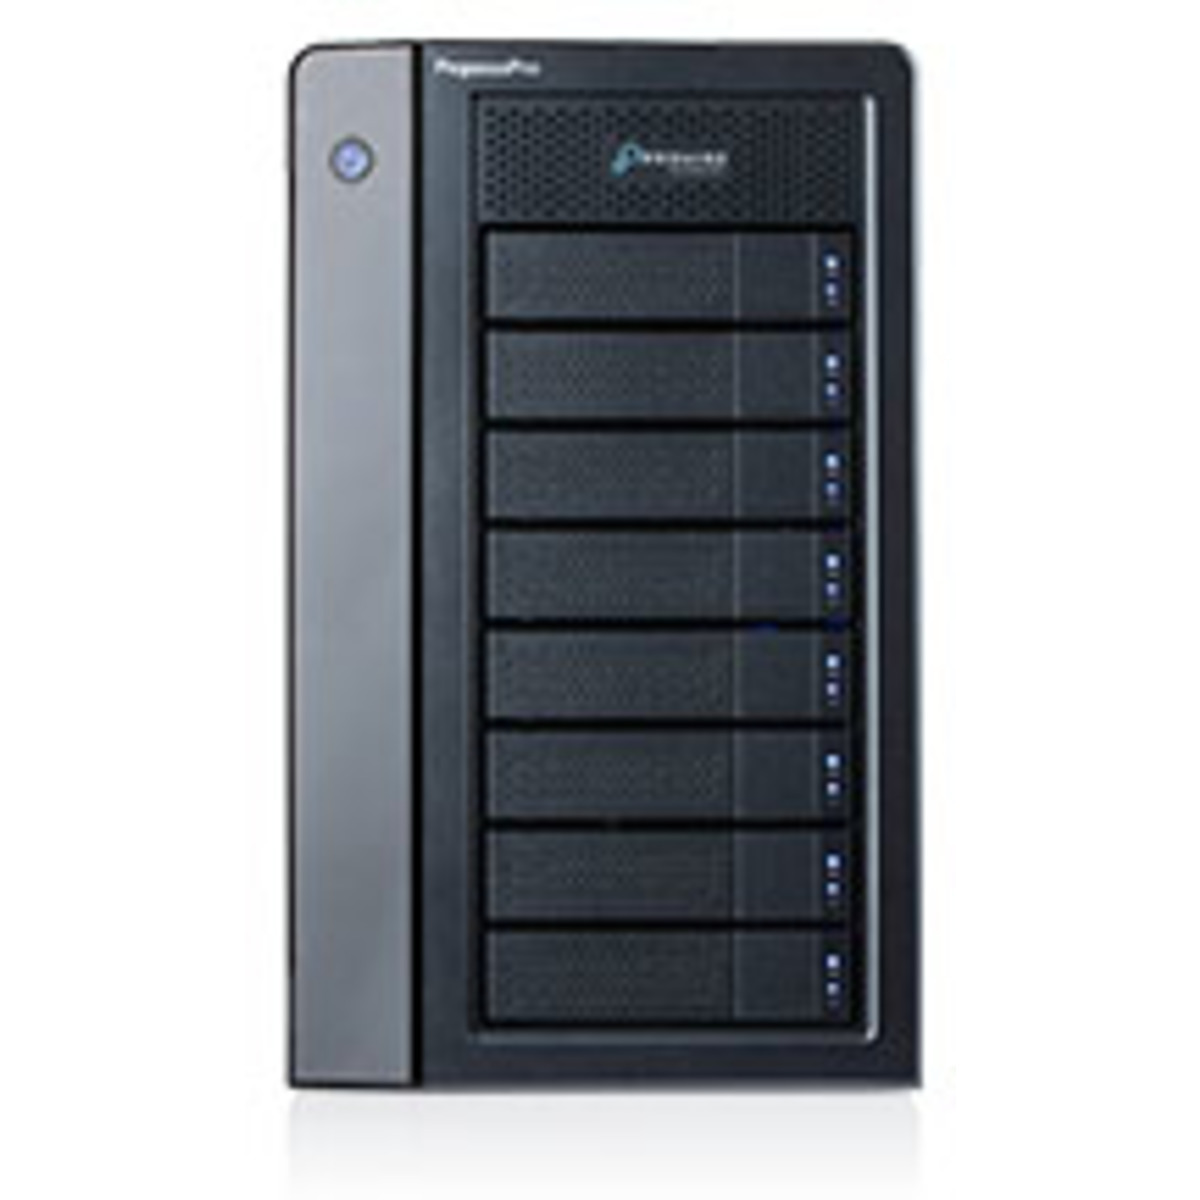 buy $11393 Promise Technology PegasusPro R8 64tb Desktop DAS-NAS - Combo Direct + Network Storage Device 8x8000gb Samsung 870 QVO MZ-77Q8T0 2.5 560/530MB/s SATA 6Gb/s SSD CONSUMER Class Drives Installed - Burn-In Tested - nas headquarters buy network attached storage server device das new raid-5 free shipping usa PegasusPro R8